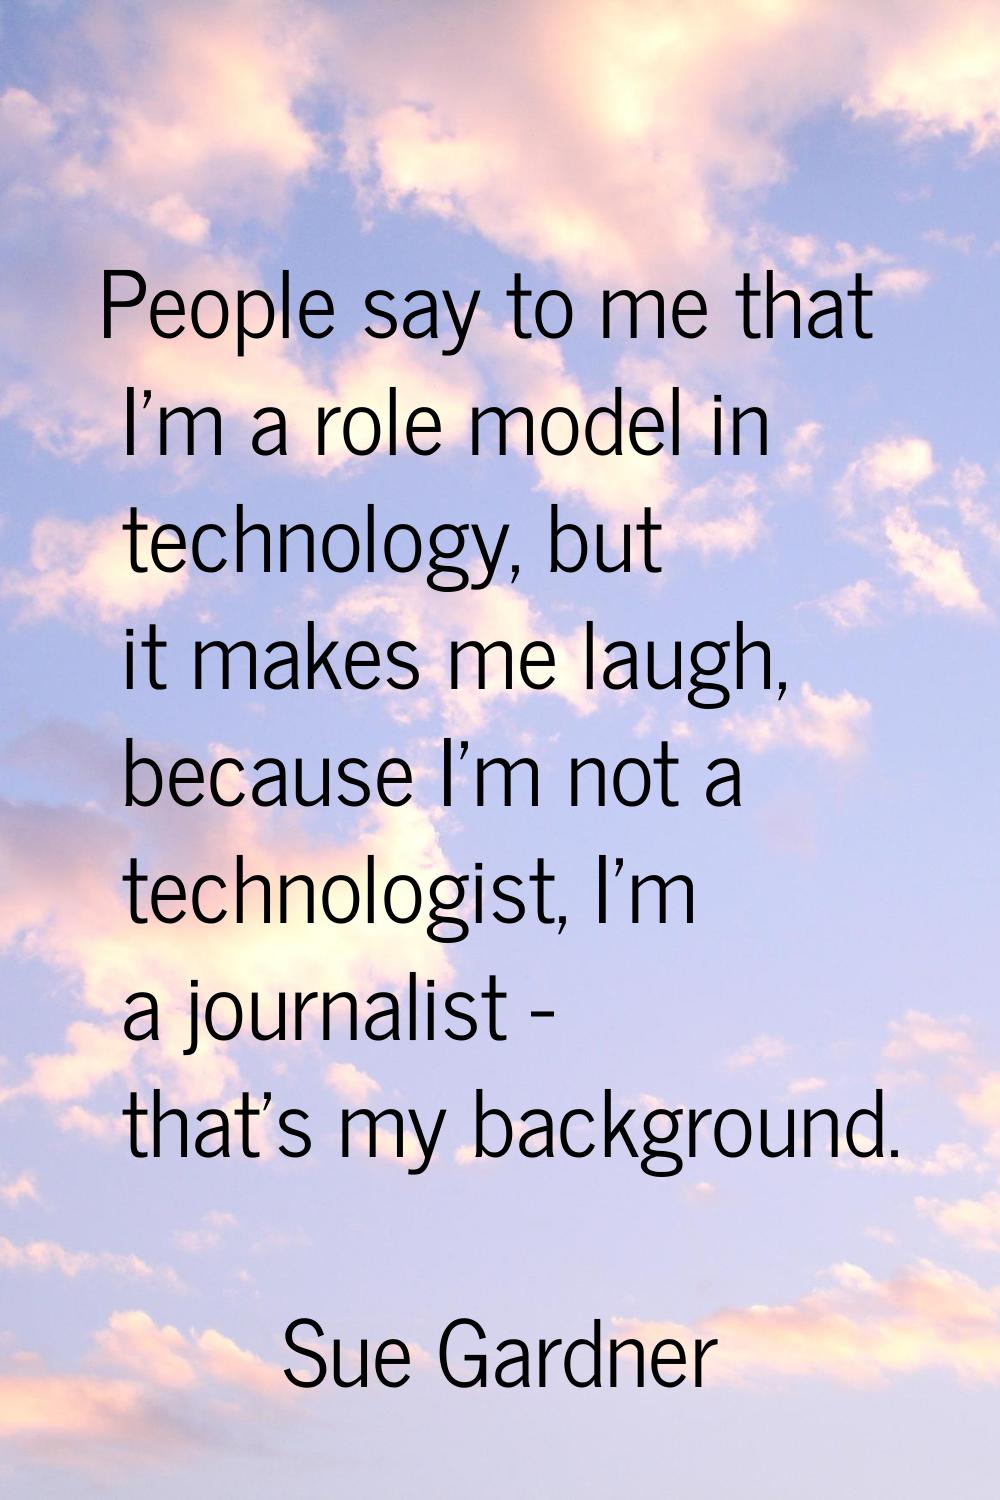 People say to me that I'm a role model in technology, but it makes me laugh, because I'm not a tech